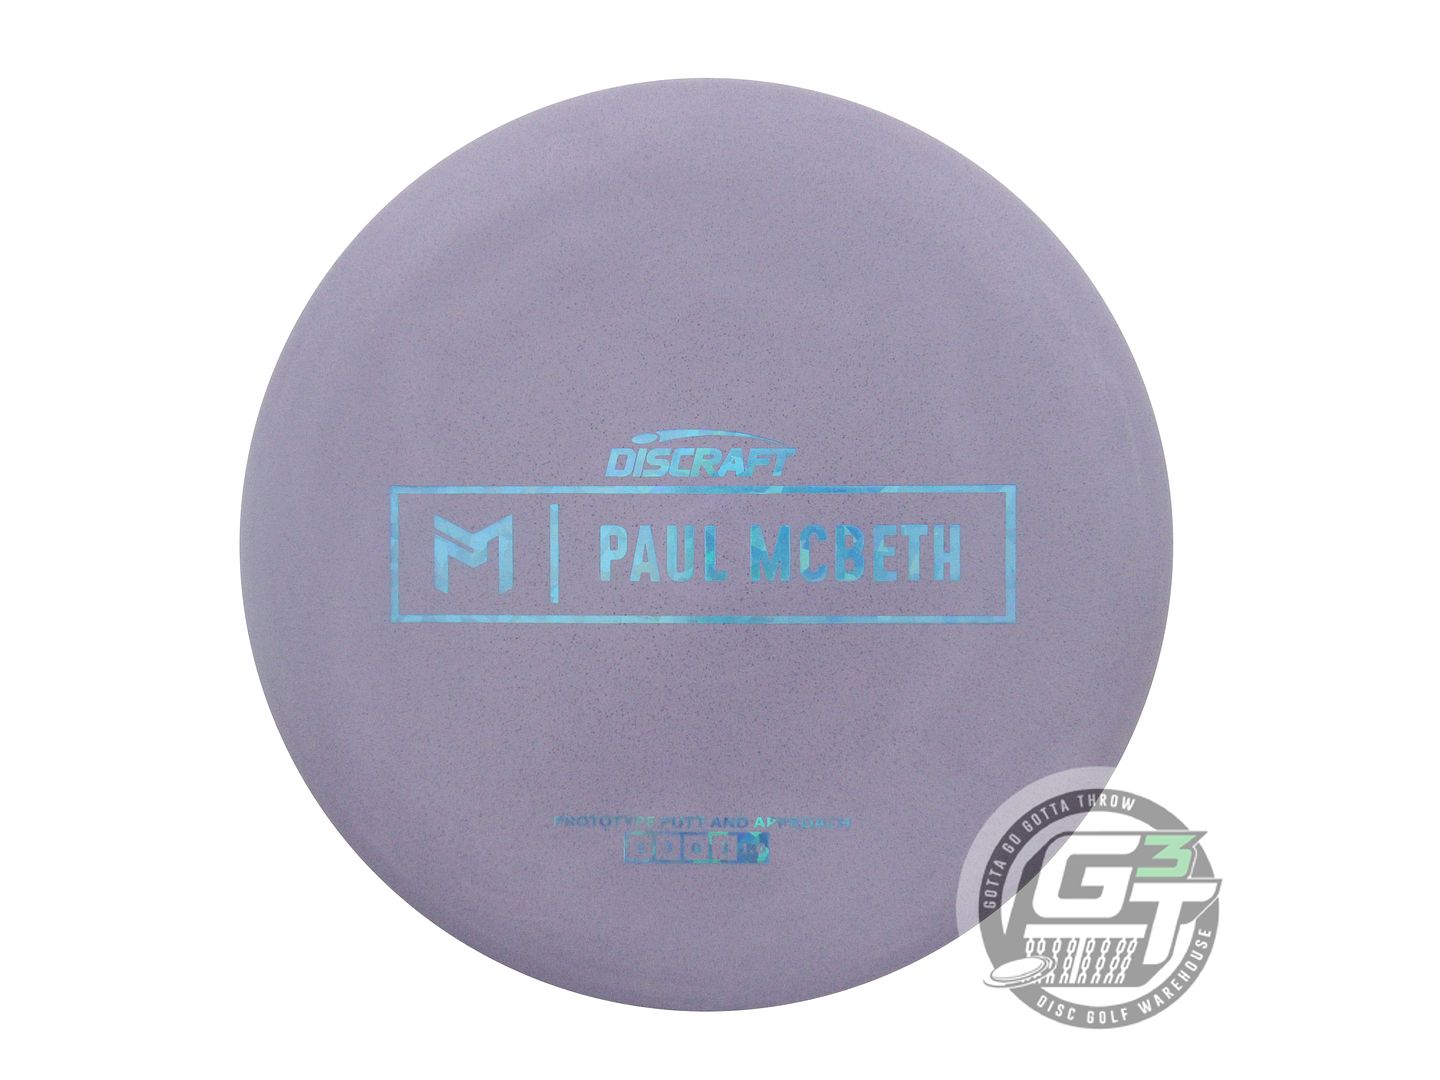 Discraft Limited Edition Prototype Paul McBeth Signature Rubber Blend Kratos Putter Golf Disc (Individually Listed)